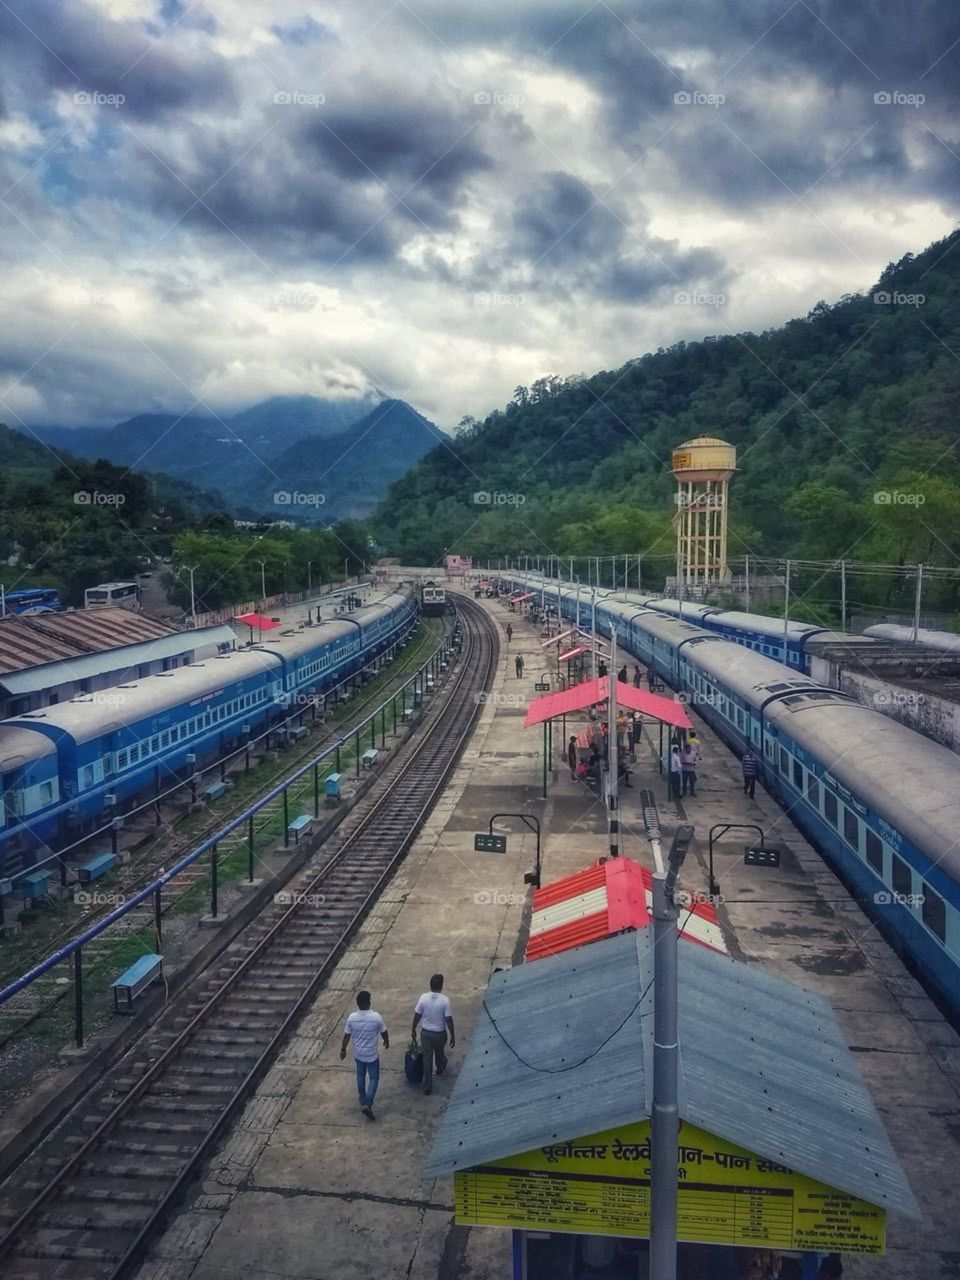 # railway station# cloudy# humid weather# mountain view# relax mode# lovely weather#